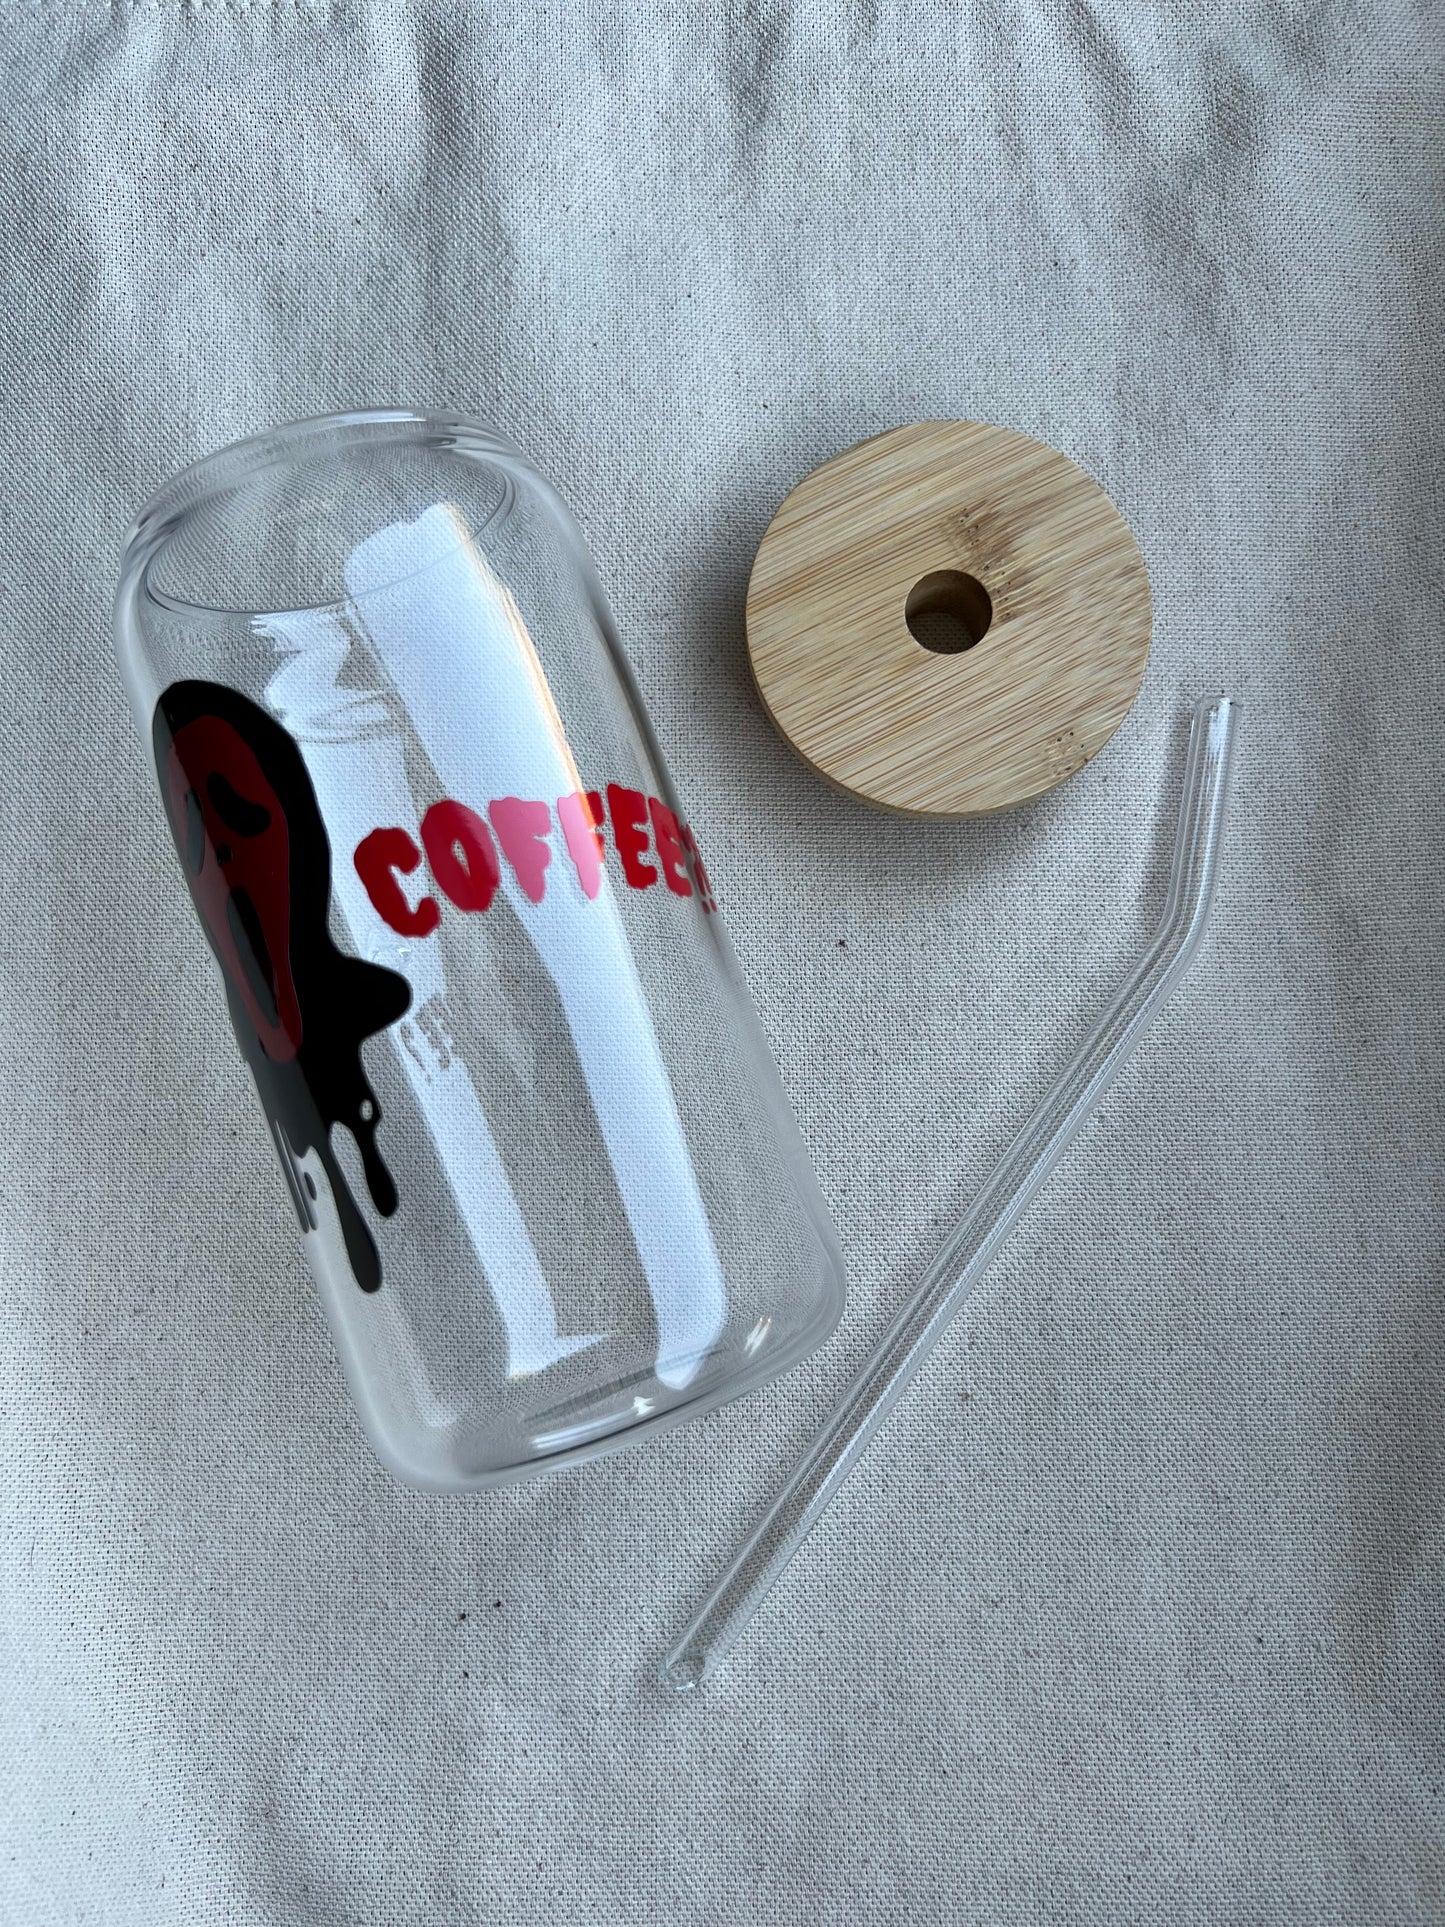 20 oz glass can with red text and a bamboo lid and glass straw